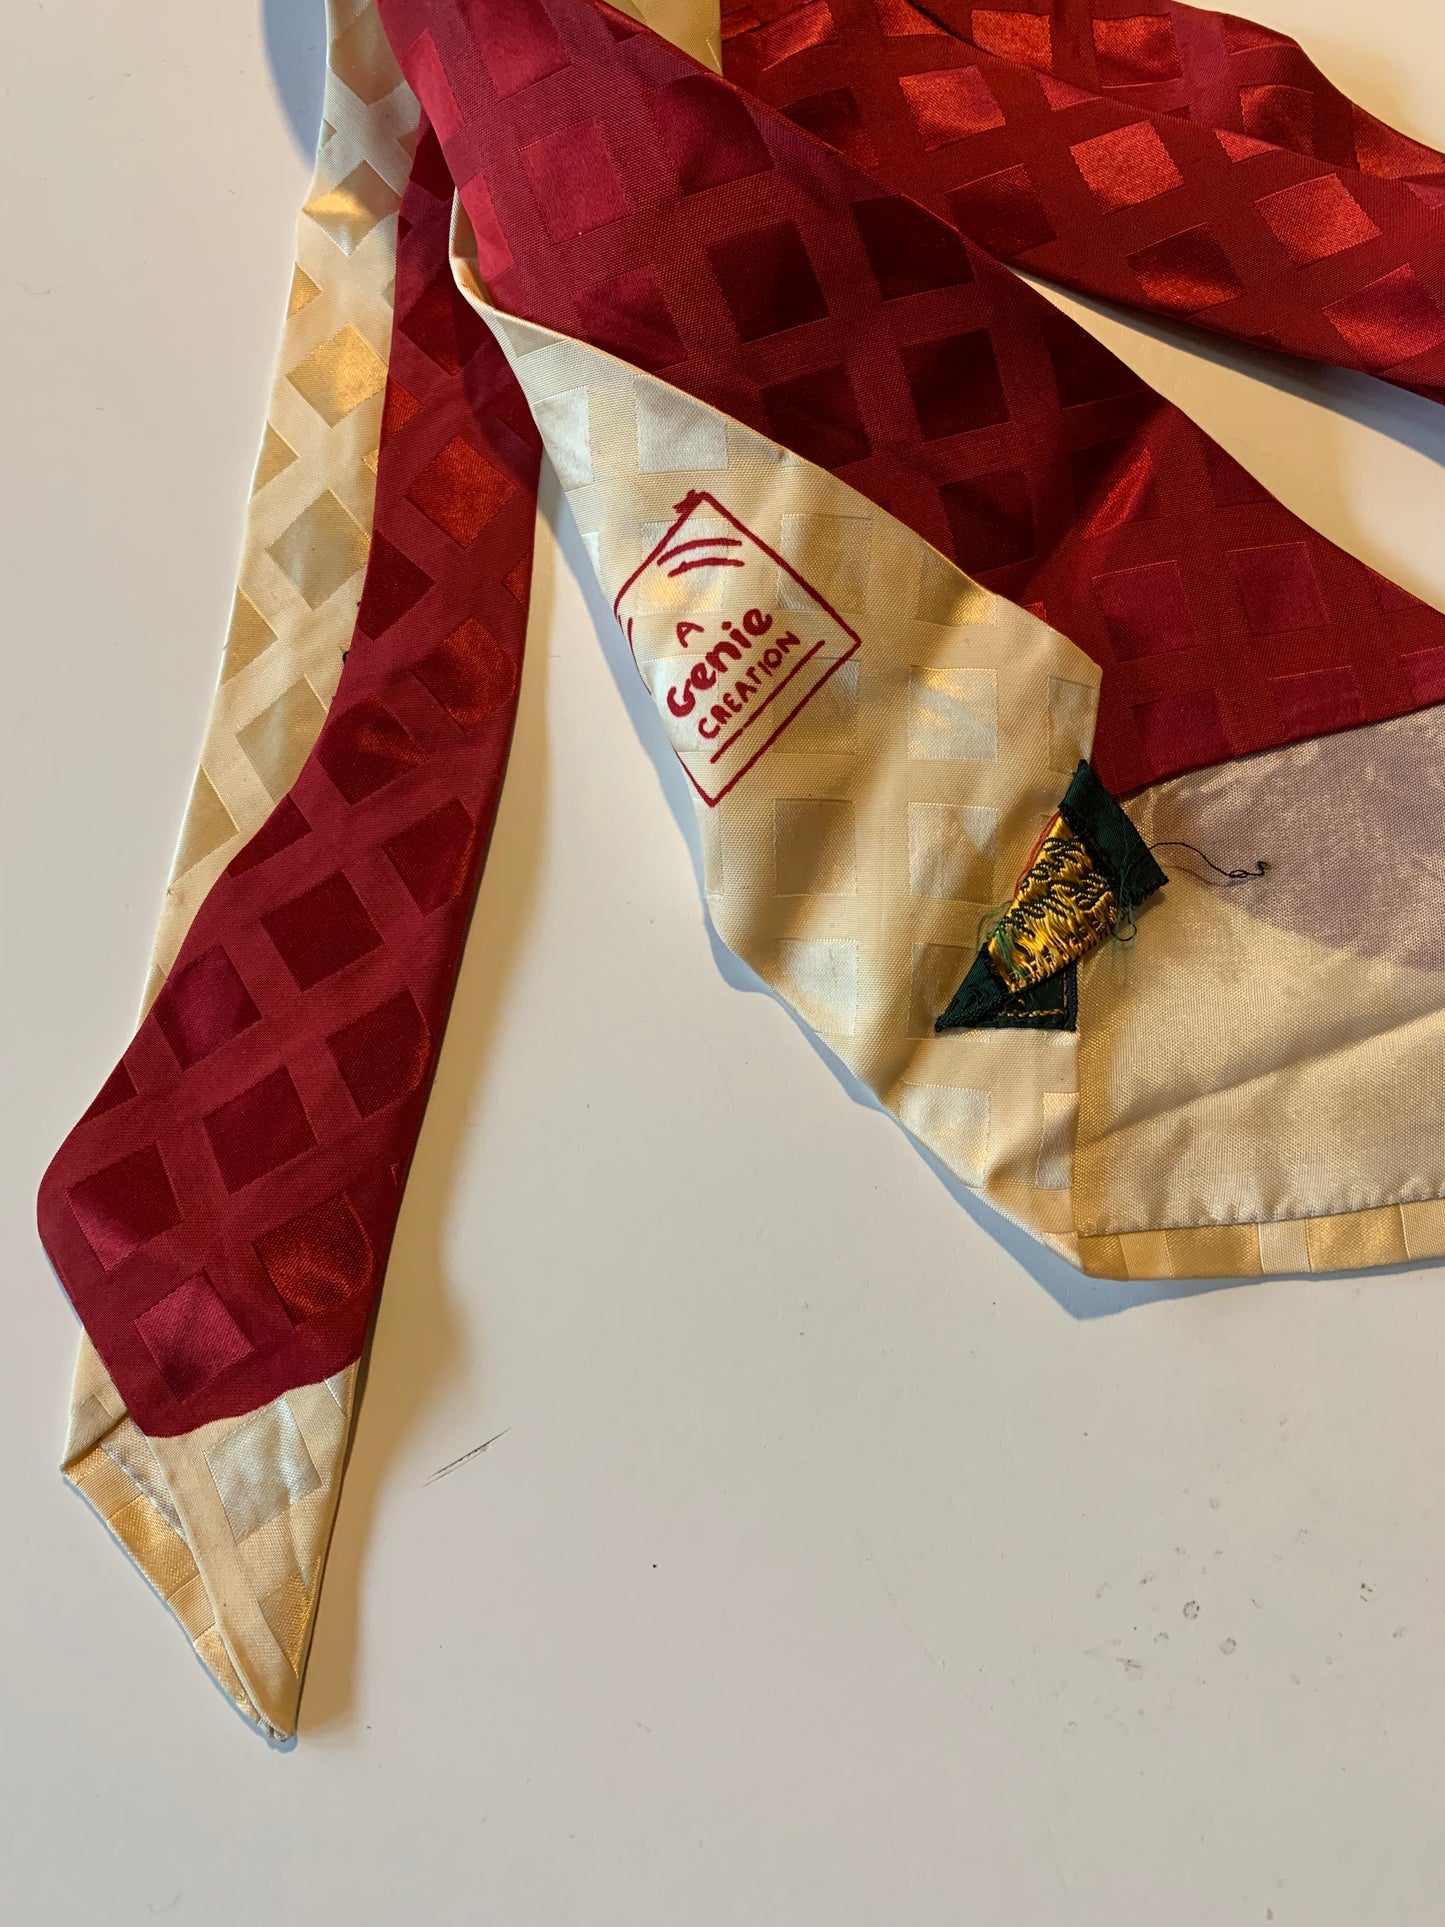 Two Tone Cranberry and Ivory Silk Men's Tie circa 1940s